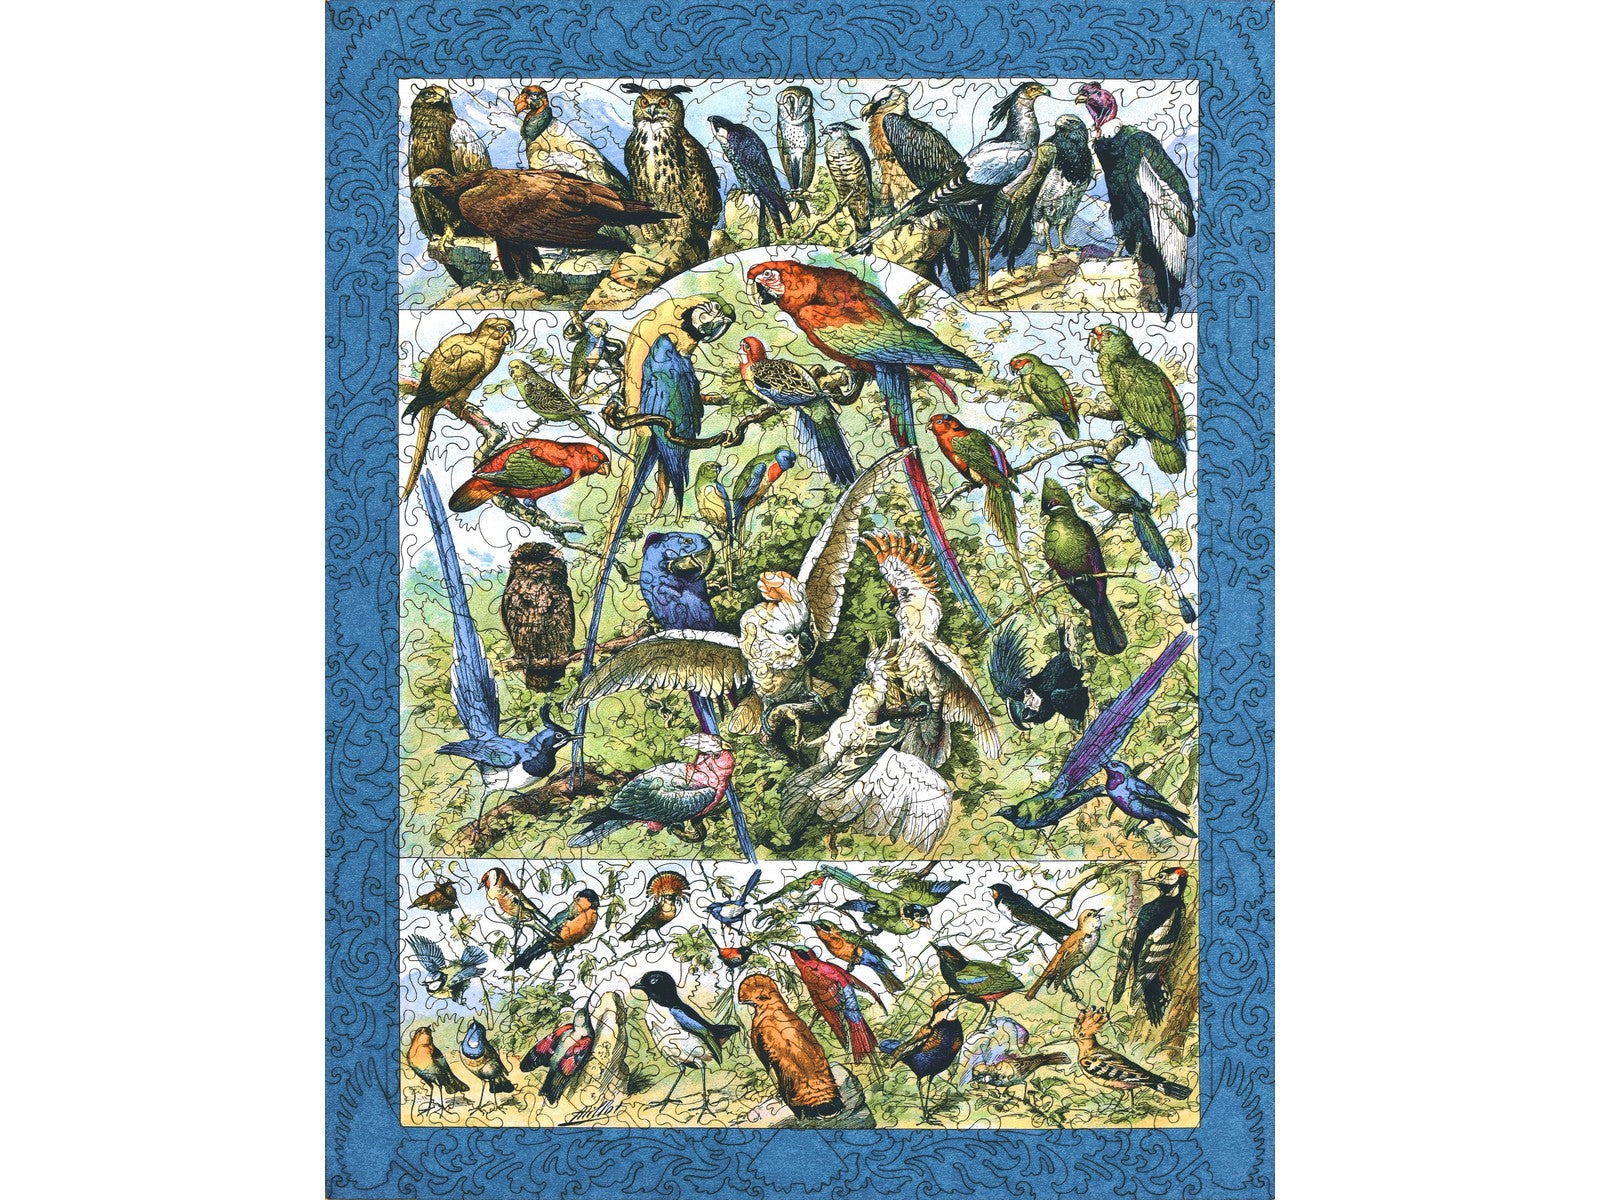 The front of the puzzle, Oiseaux: Varieties of Birds.